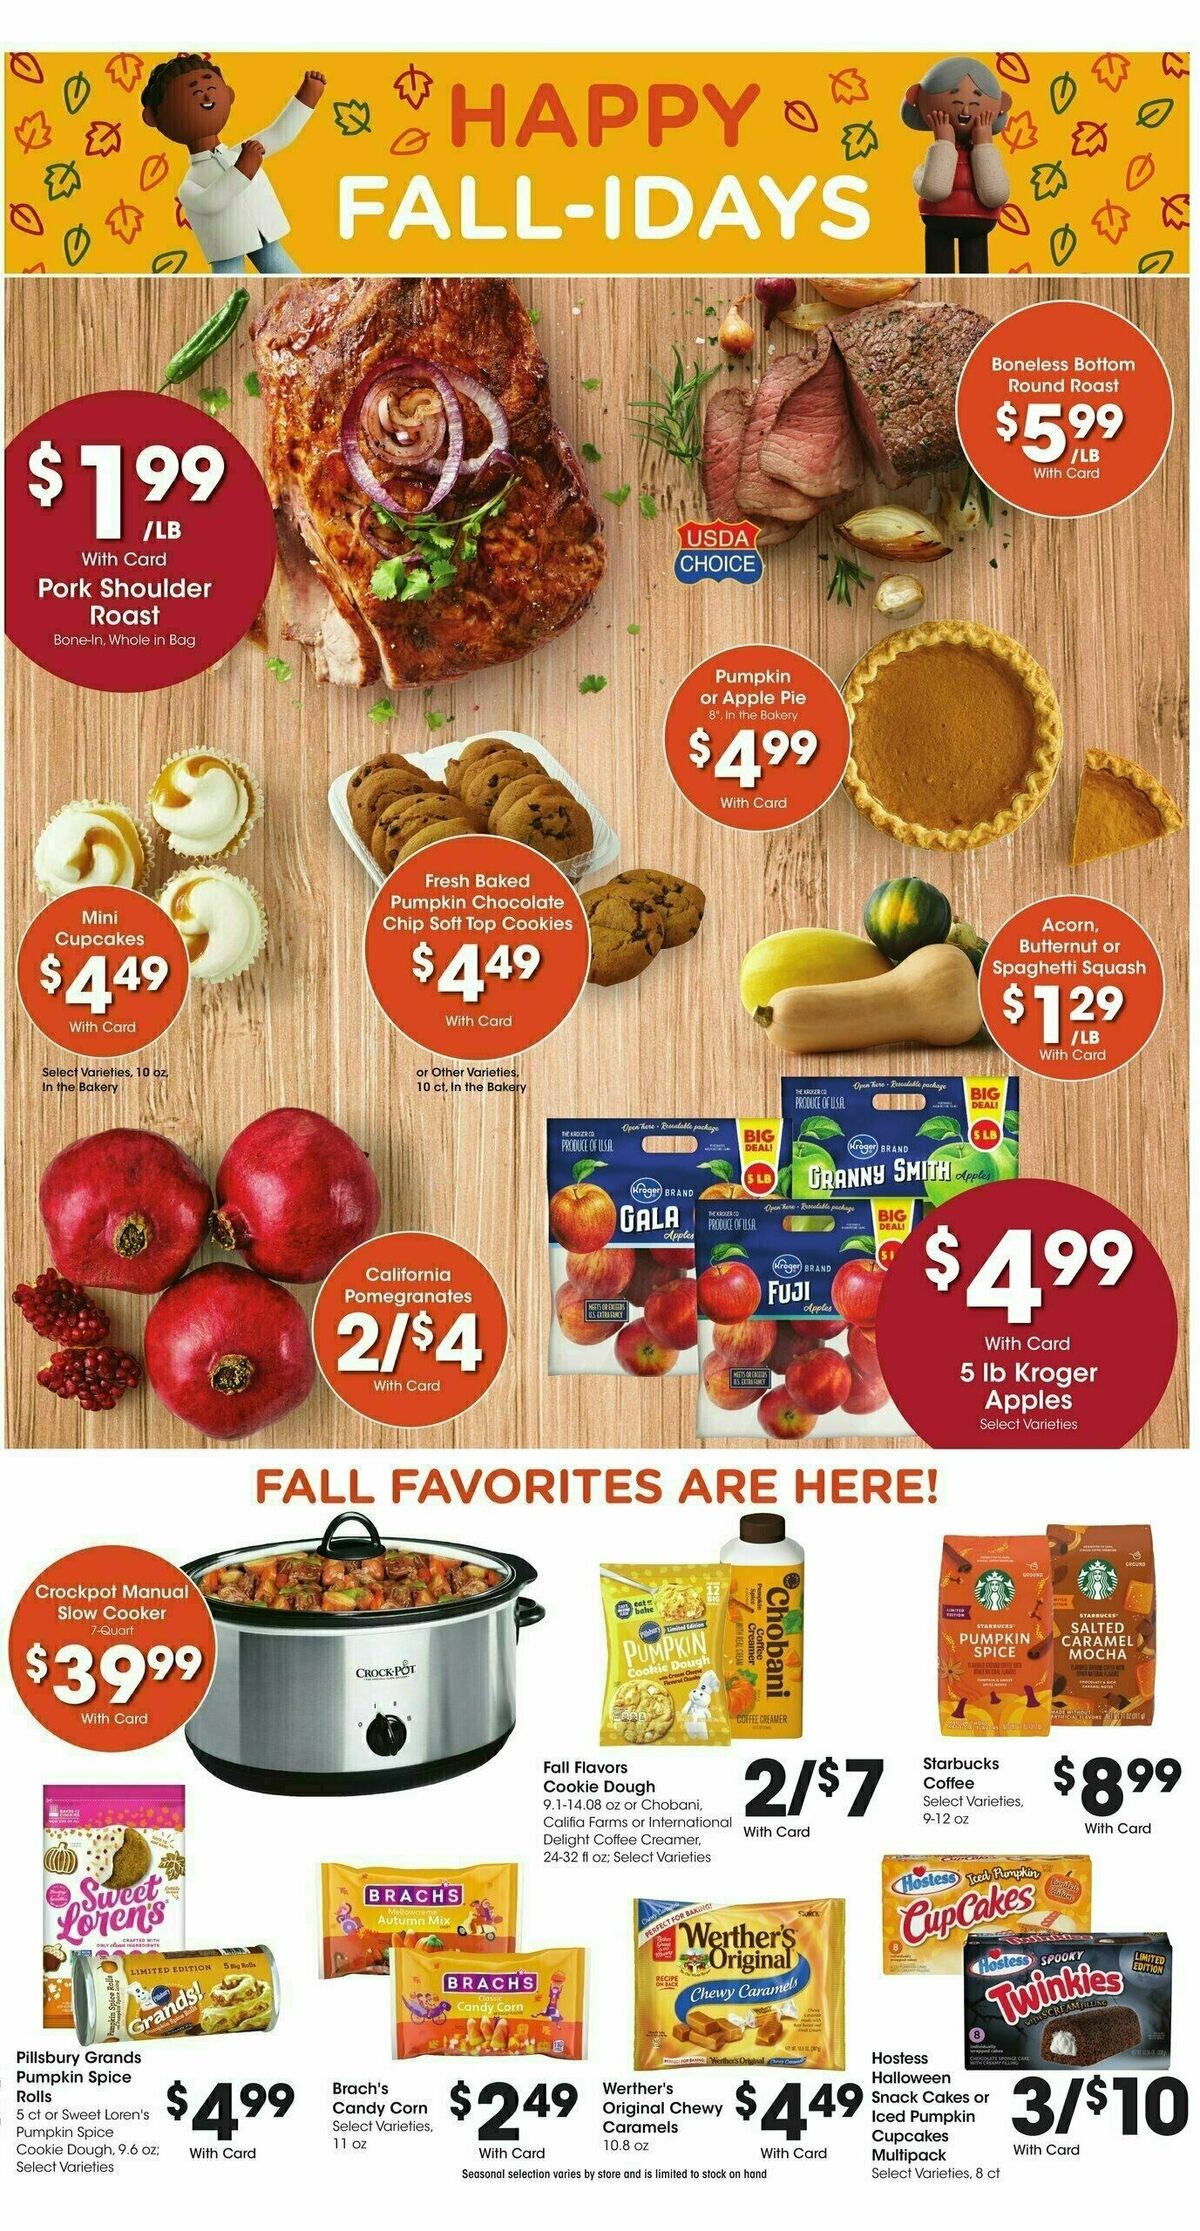 City Market Weekly Ad from September 20